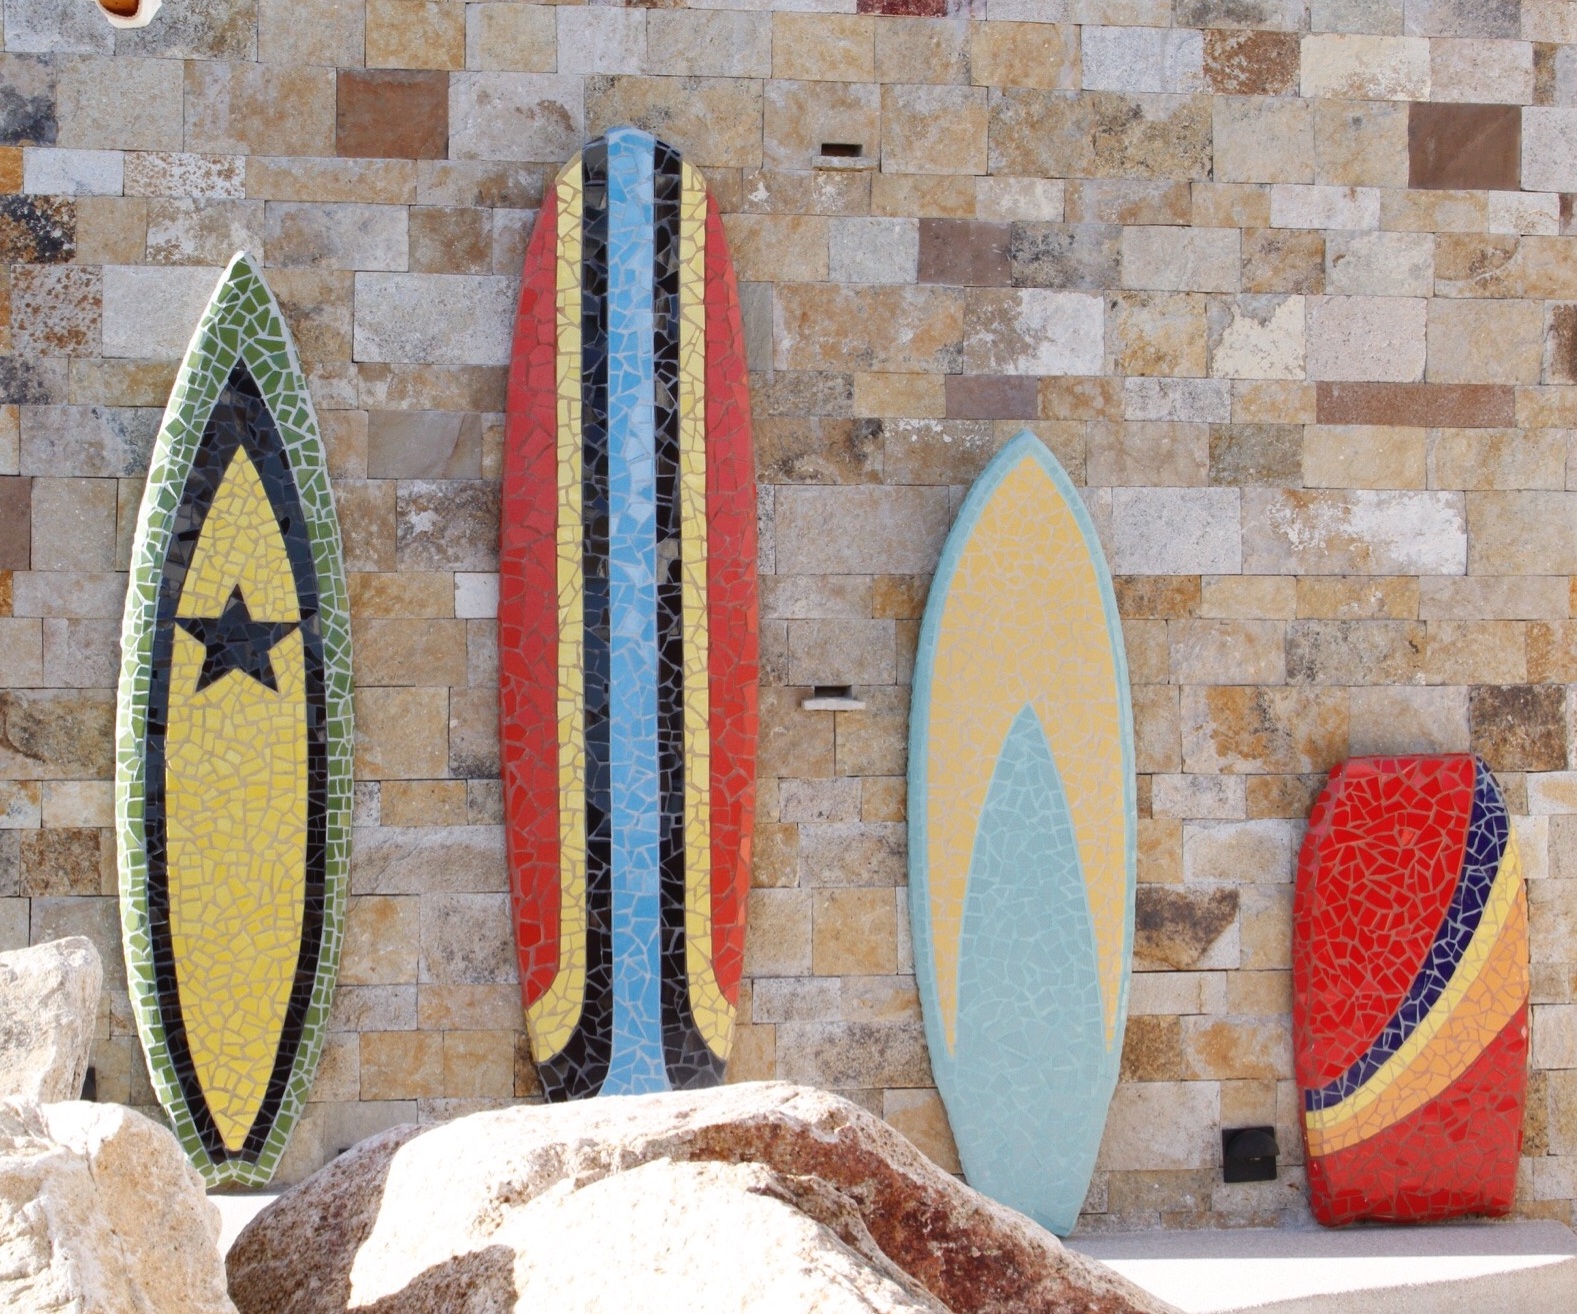  Starting in 2016,  Chileno Bay Resorts and Residencies , in San Jose del Cabo, B.C.S, MX, commissioned mosaic surfboards for their properties. To date I have created over 70 unique surfboard designs and mosaic murals for their various villas at our 